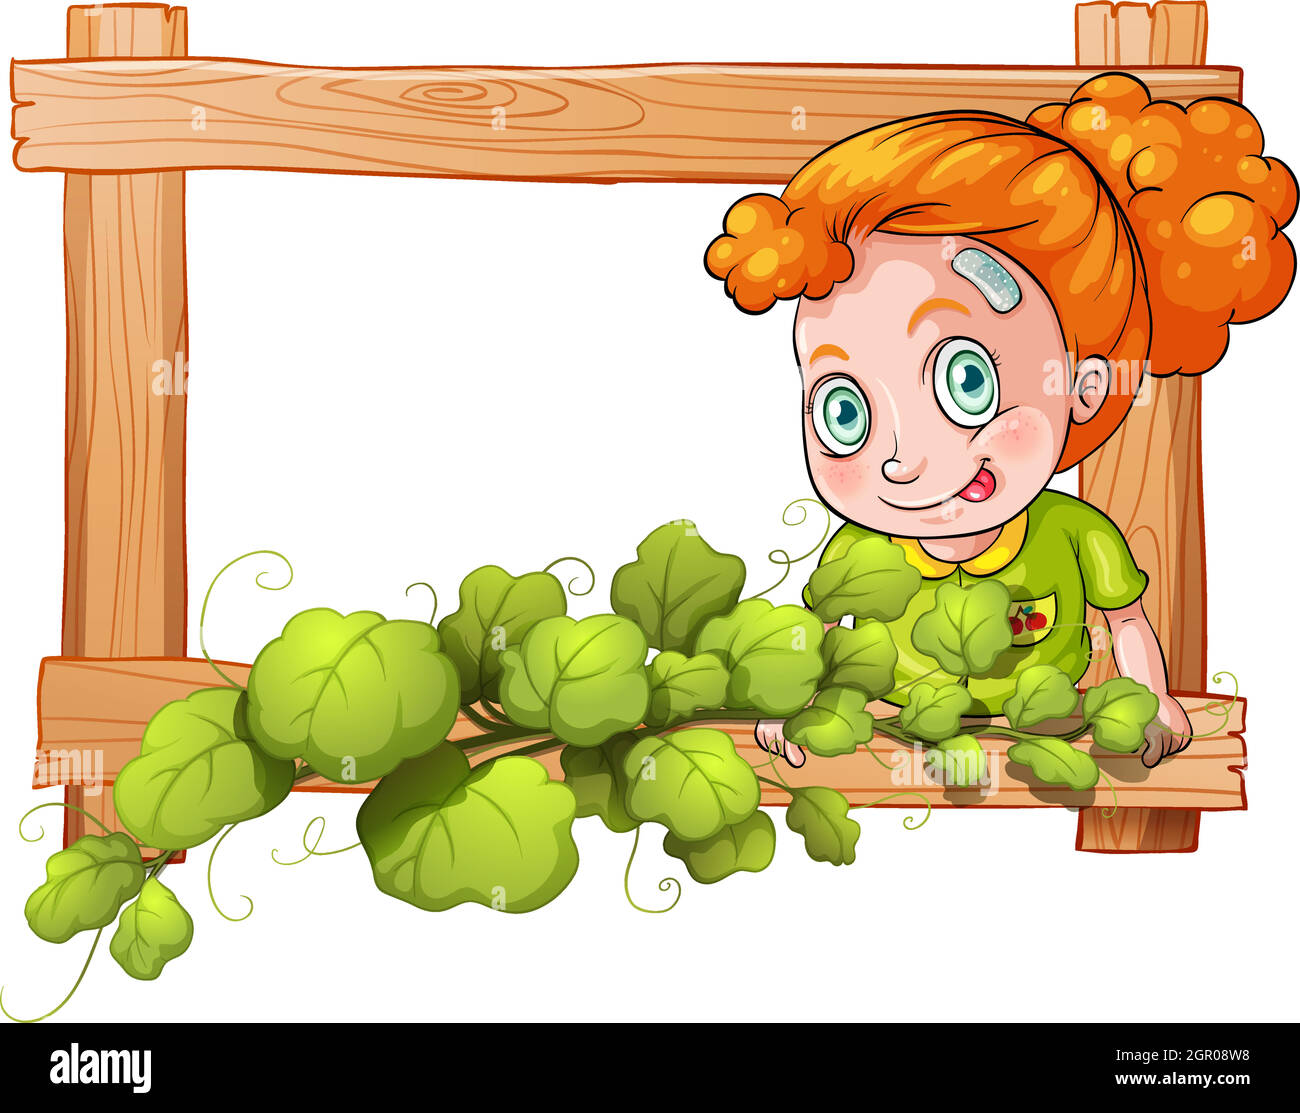 A frame with vine plants and a young girl Stock Vector